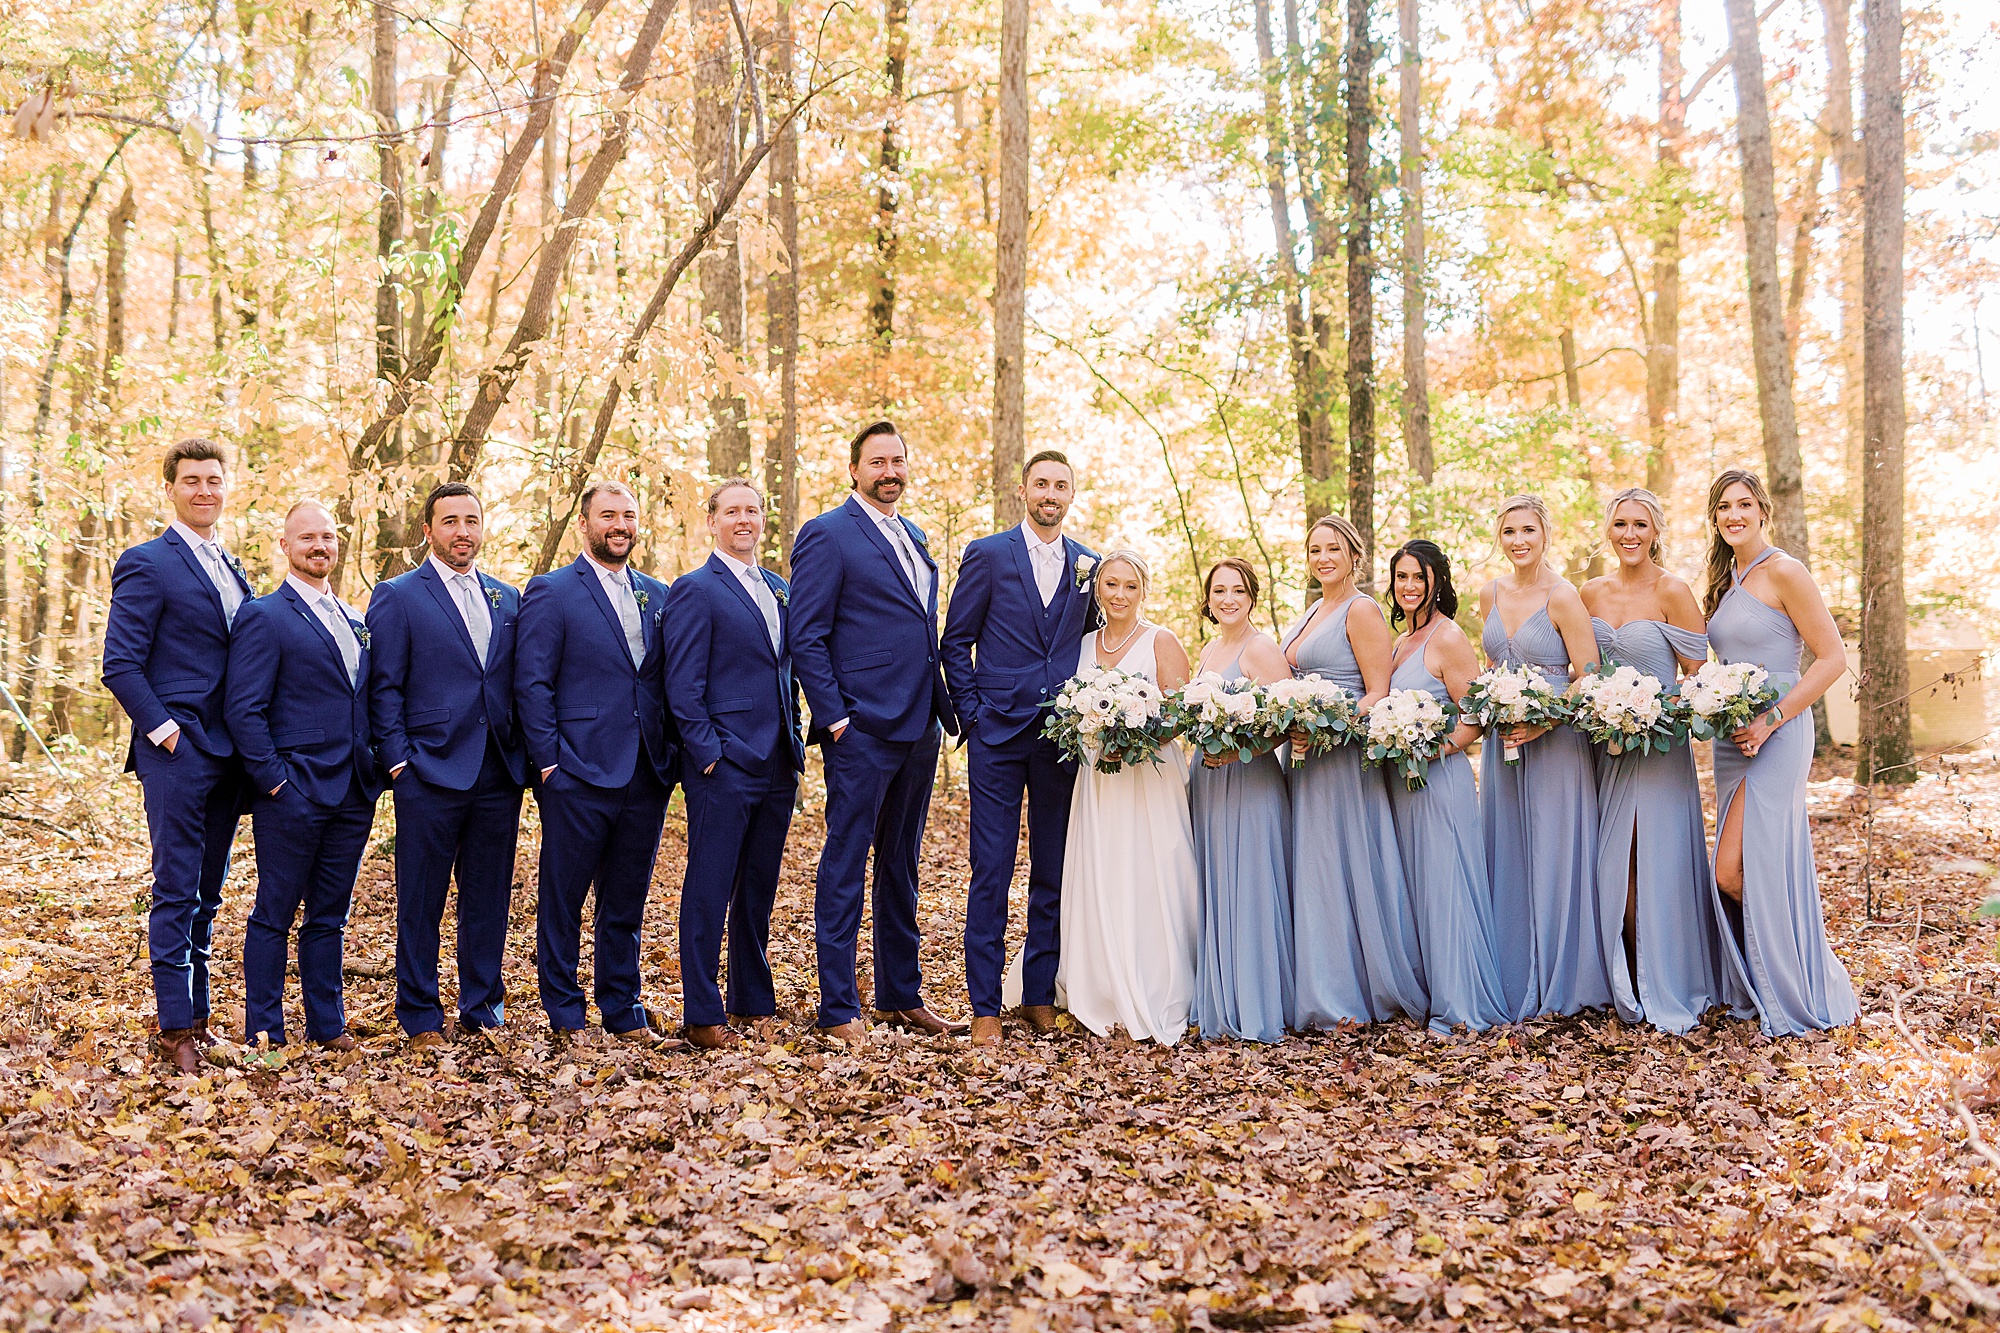 bride and groom pose with wedding party in pastel blue and navy suits